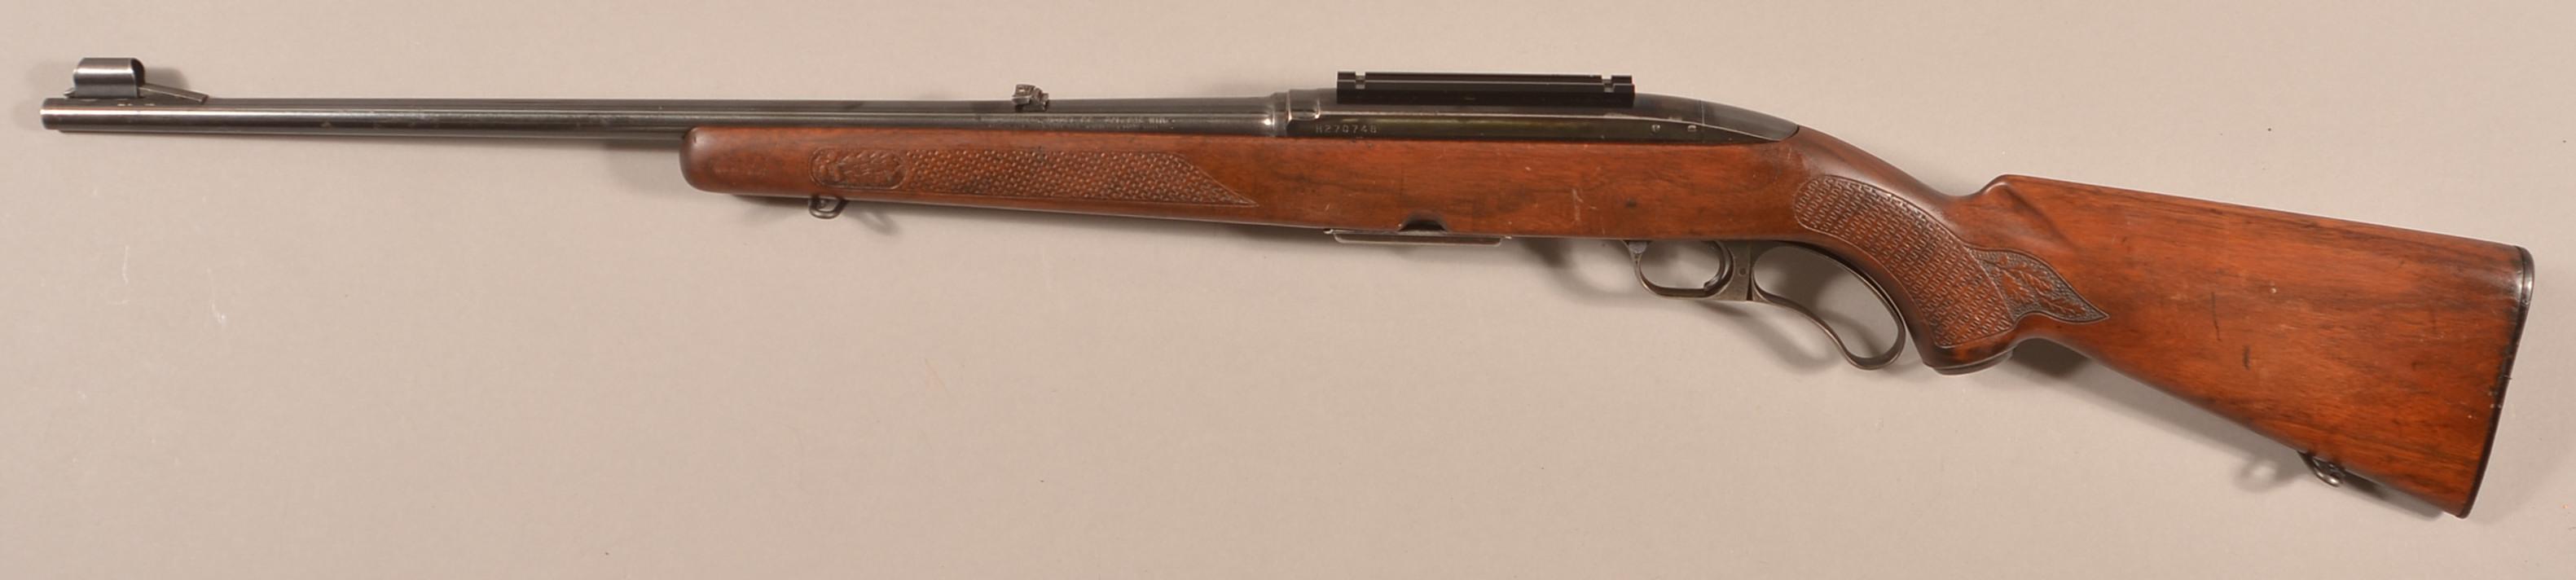 Winchester model 88 .243 lever action rifle